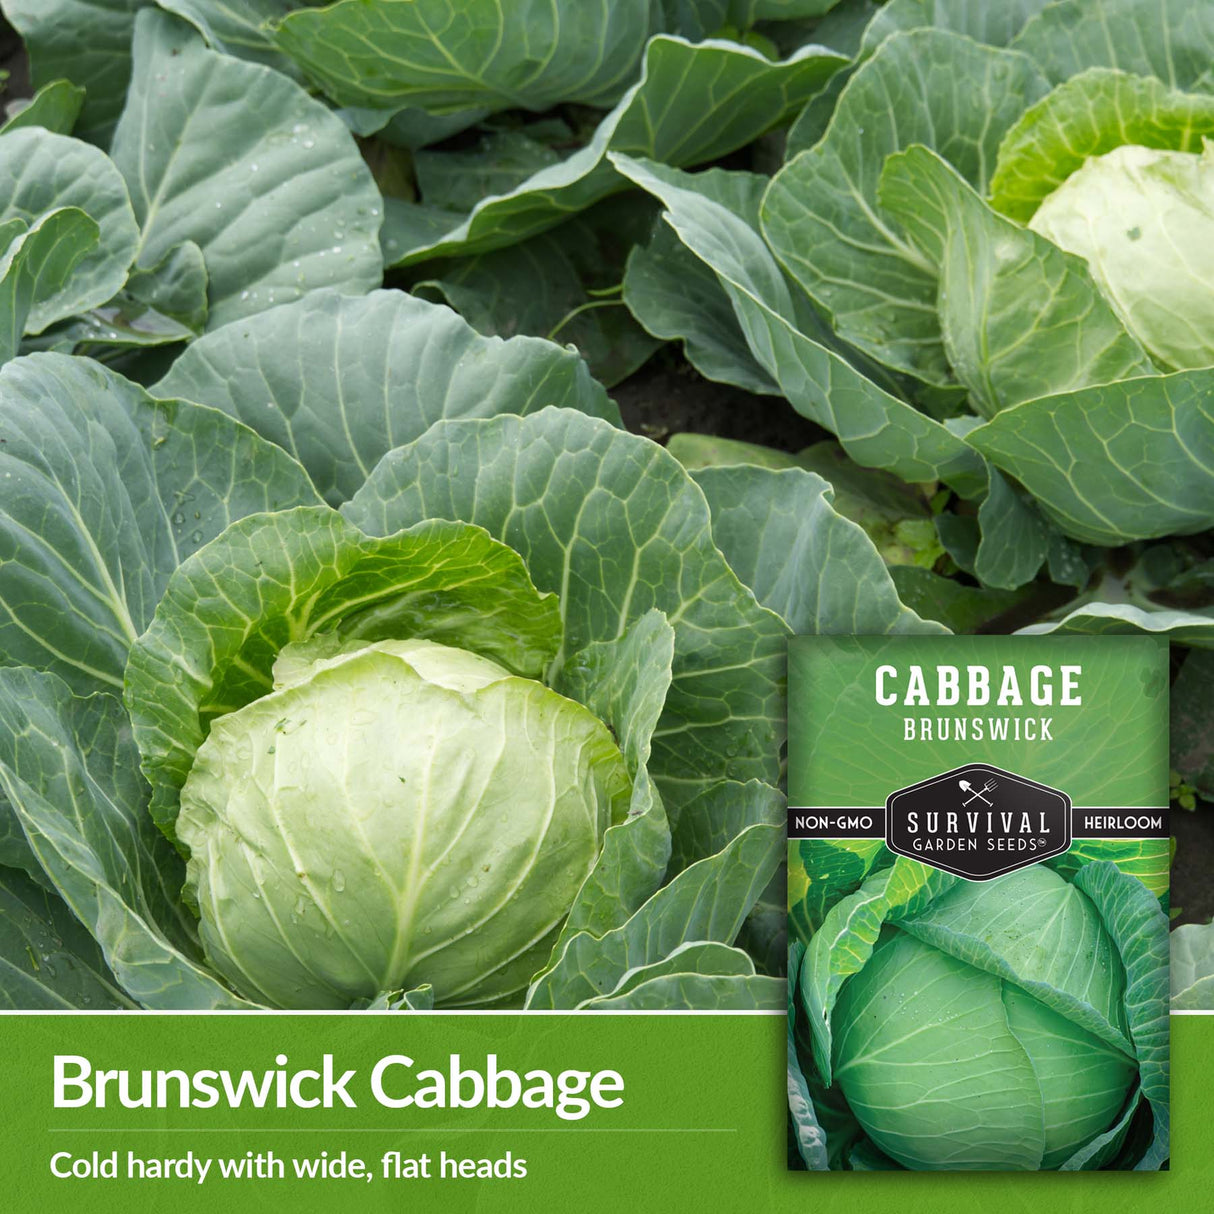 Brunswick Cabbage is cold hardy